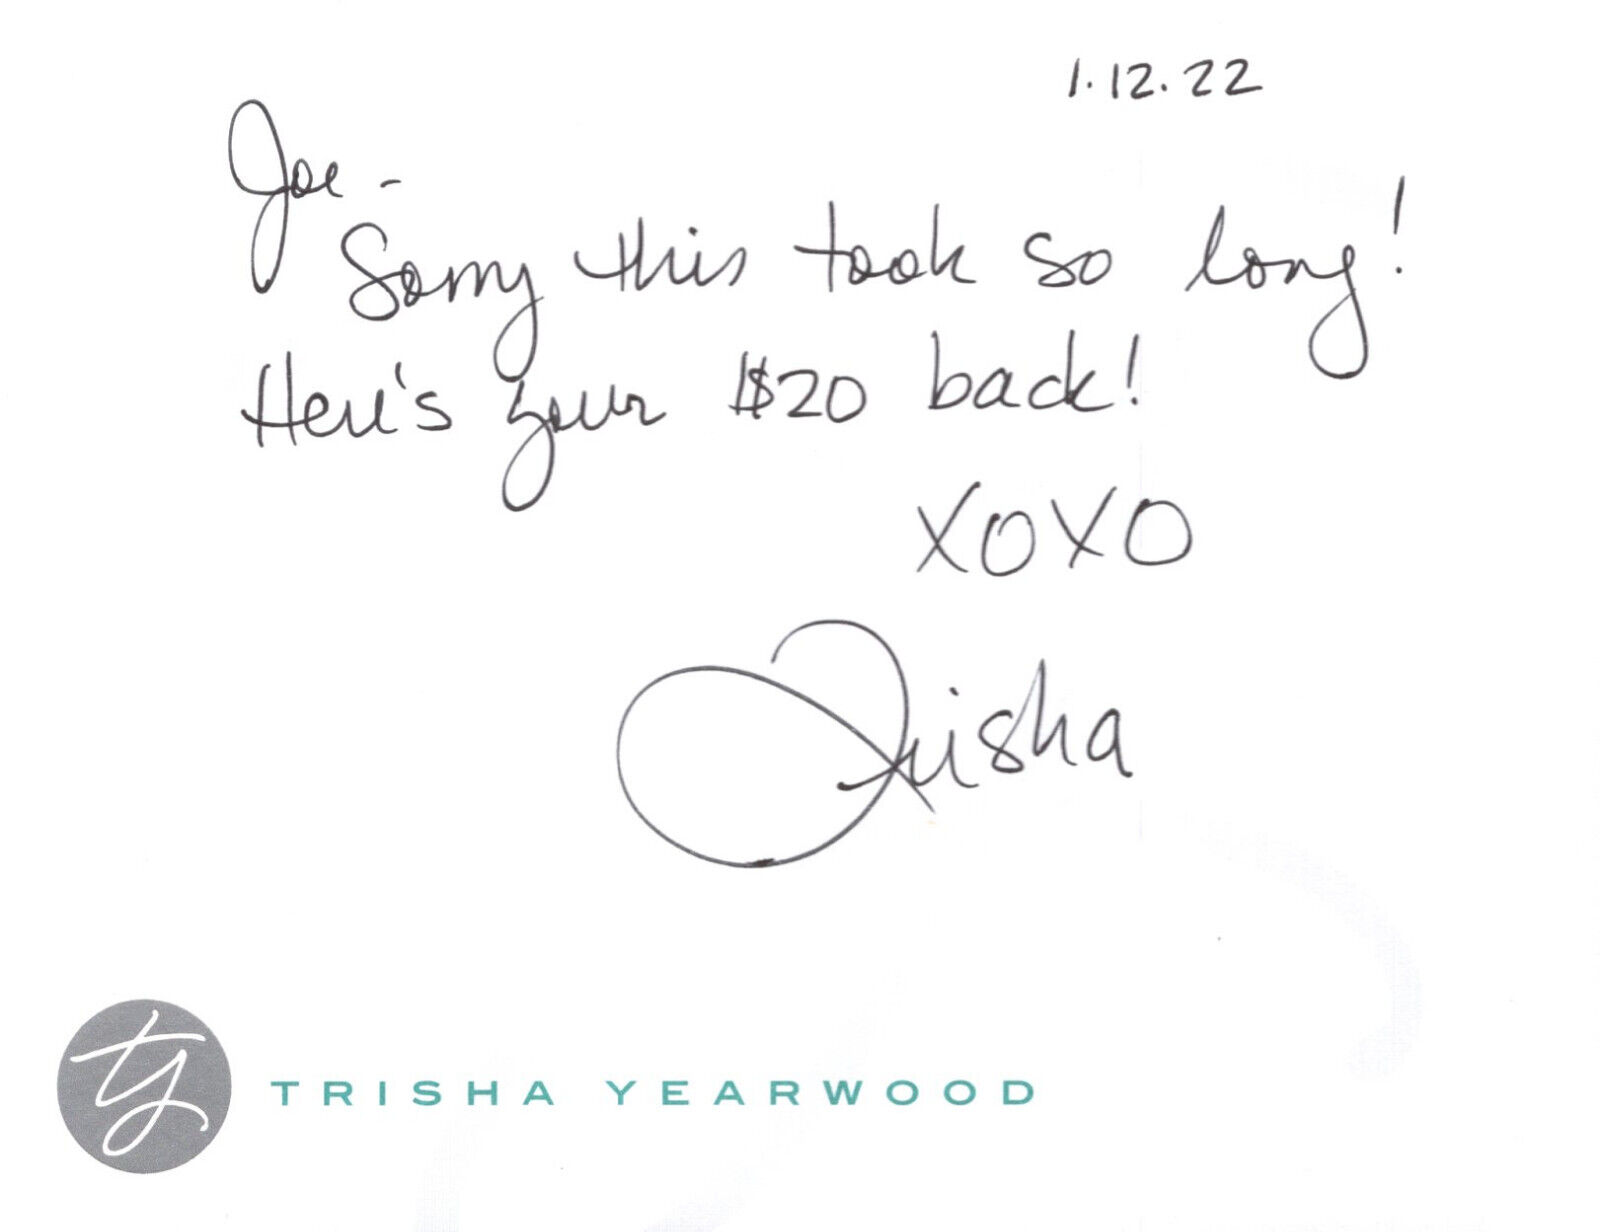 TRISHA YEARWOOD SIGNED NOTE ON HER OWN 4x5 NOTECARD+COA       COUNTRY SINGER